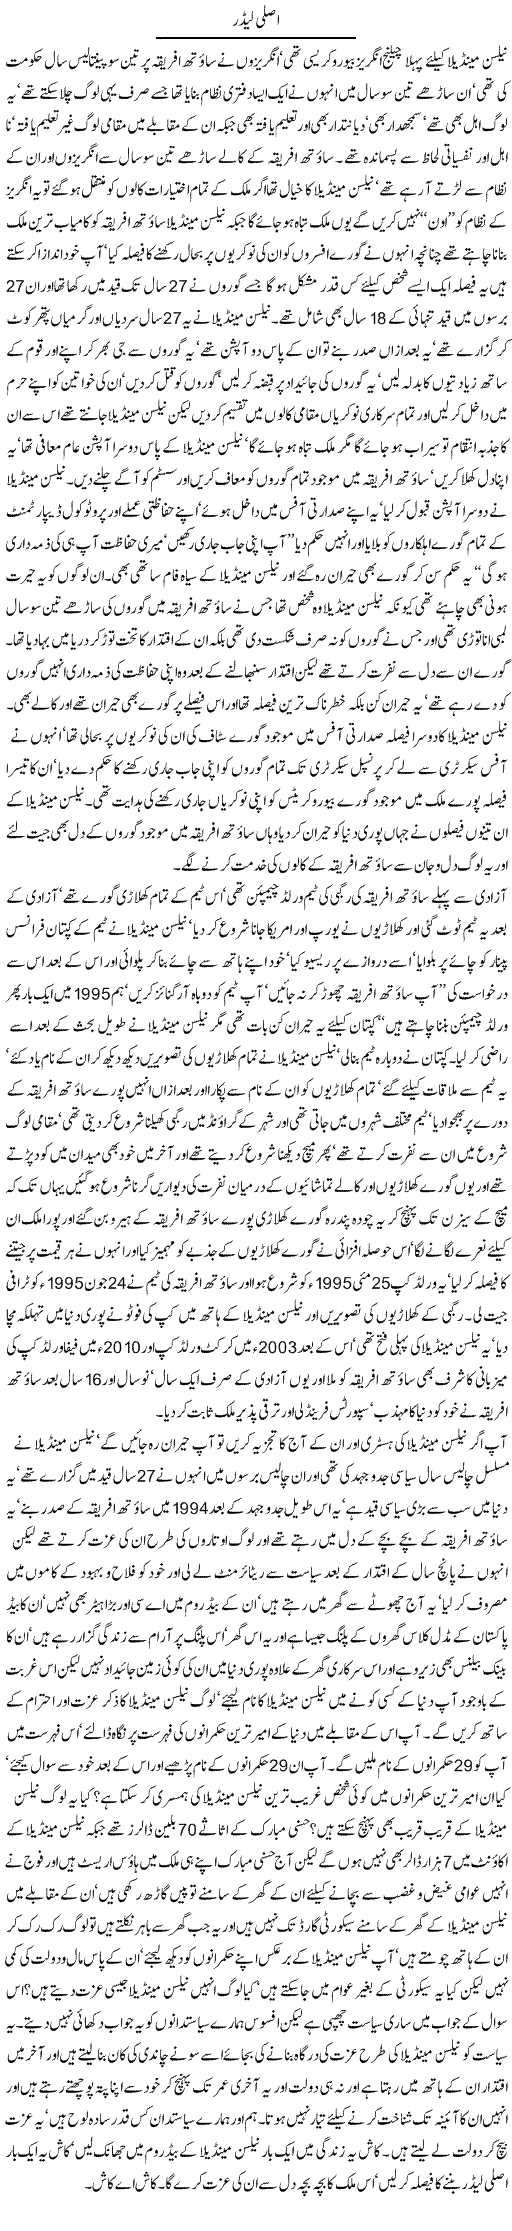 Real Leader Express Column Javed Chaudhry 25 March 2011